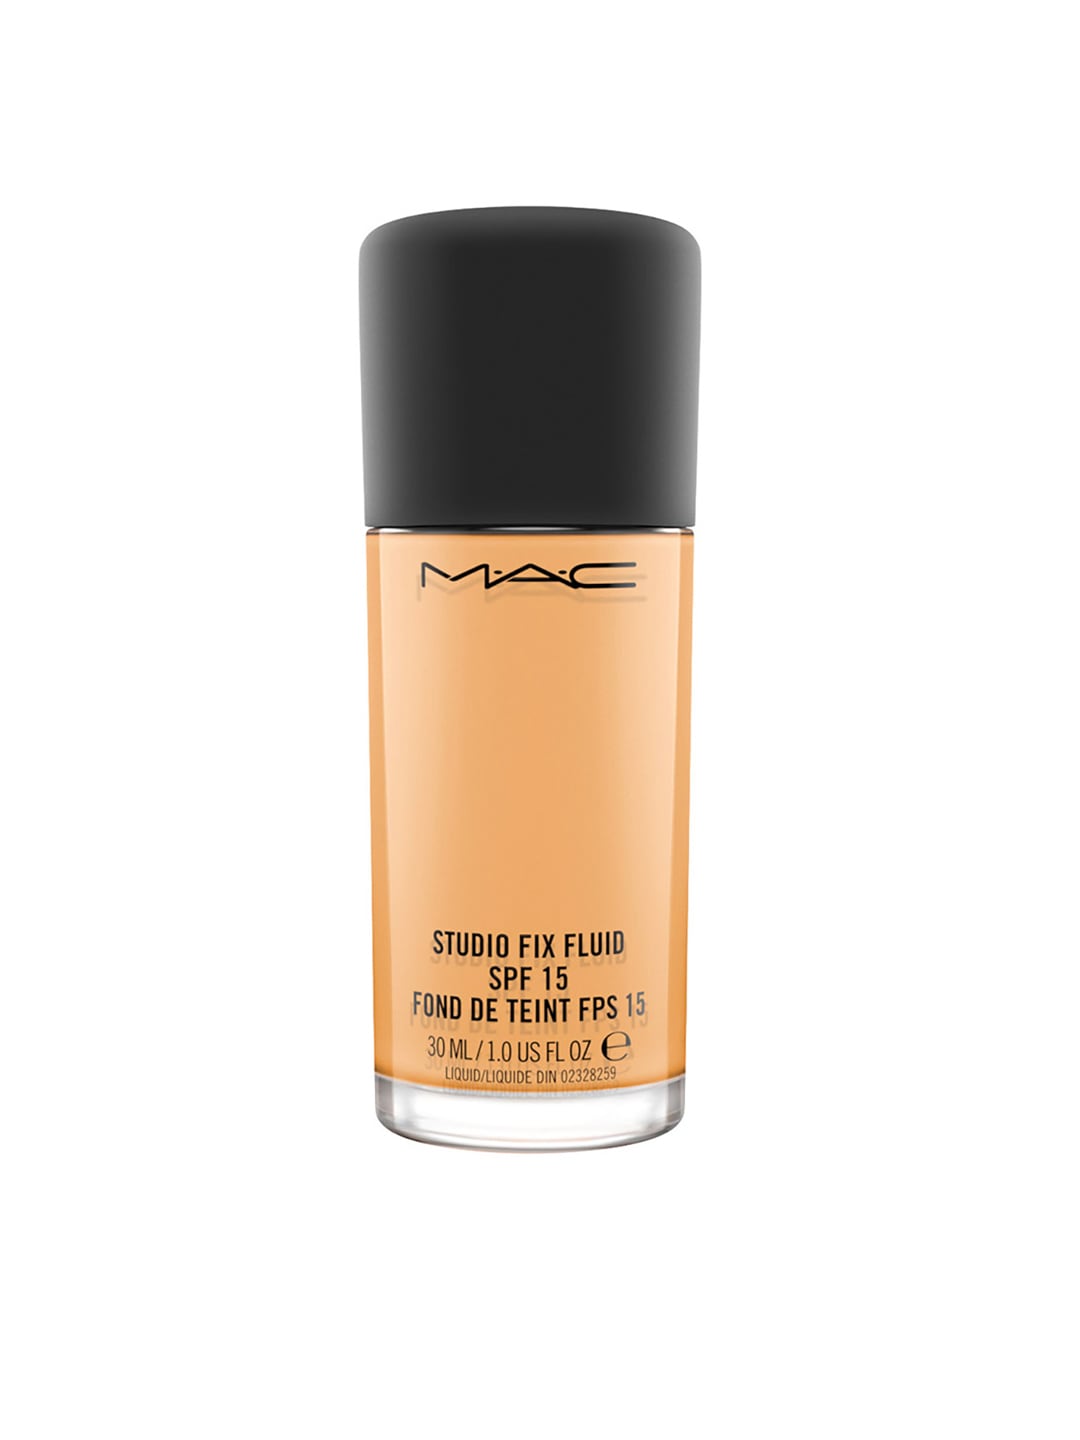 M.A.C Studio Fix Fluid Foundation with SPF 15 - NC44.5 30ml Price in India